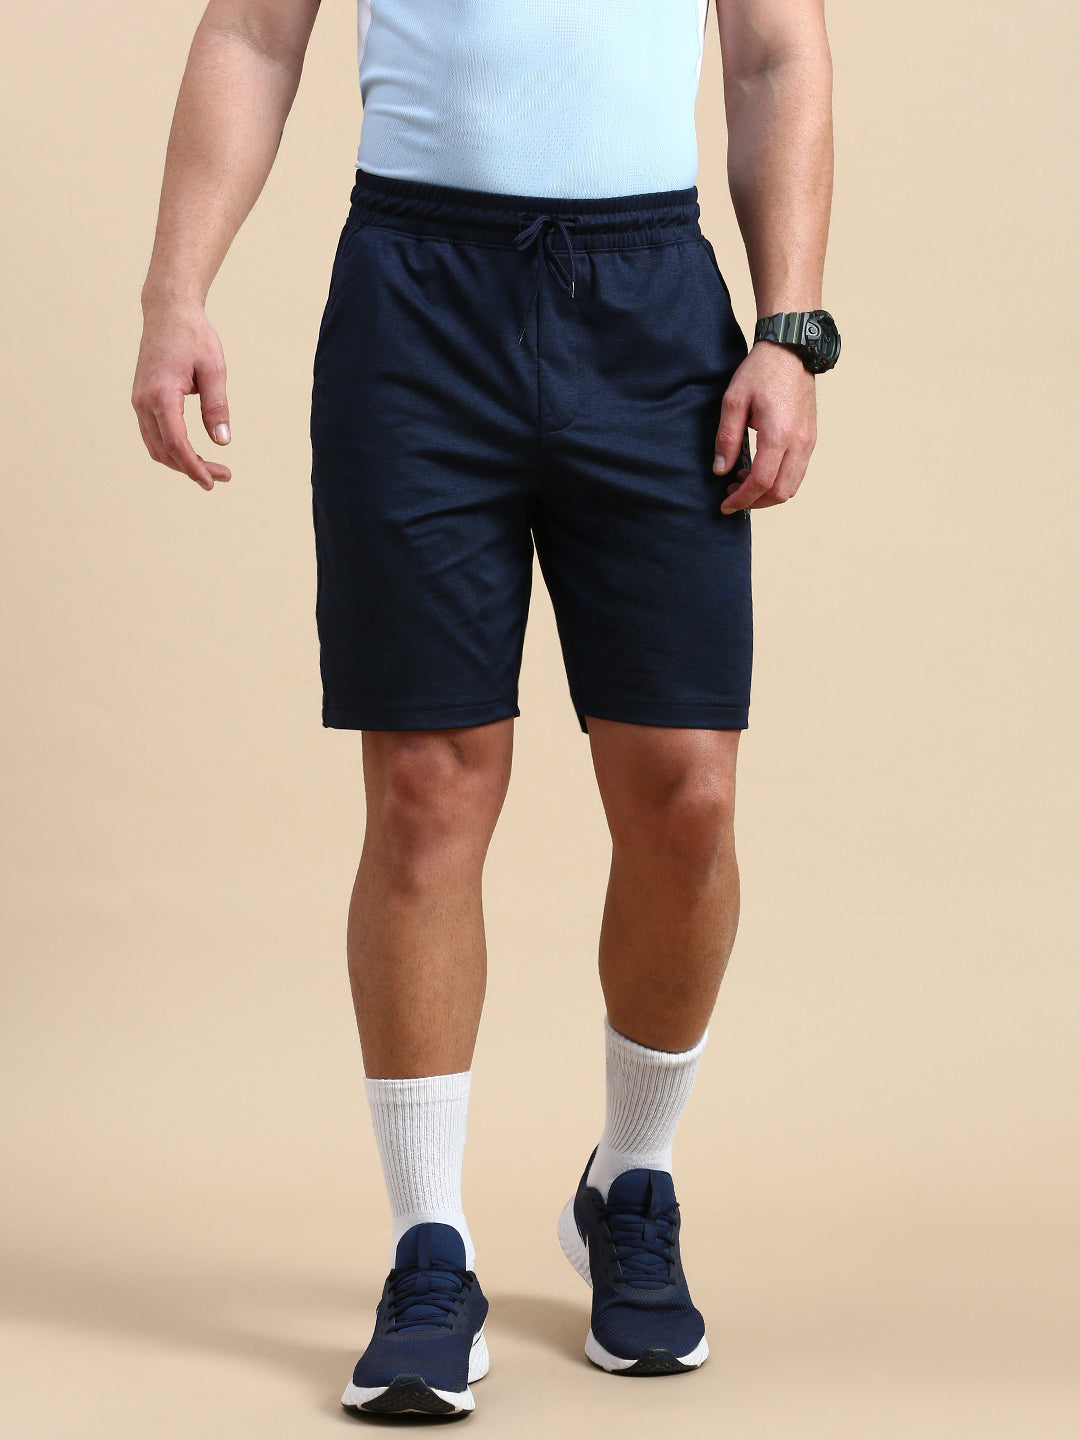 Classic Polo Men's Bottom Polyester Navy Blue Slim Fit Active Wear Shorts